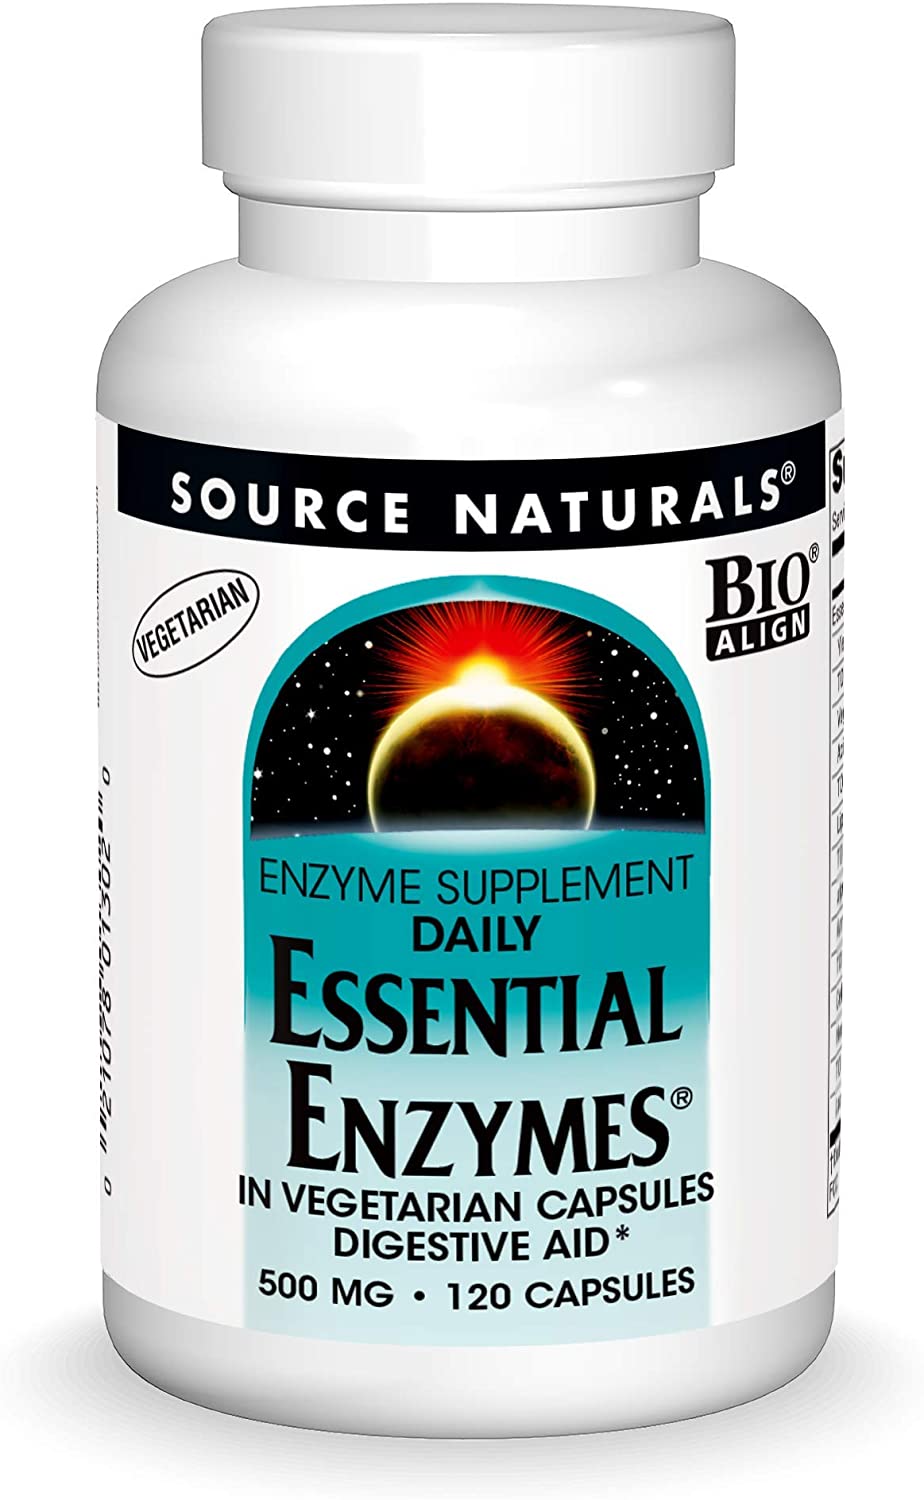 Source Naturals Digestive Enzymes, Pork-Free